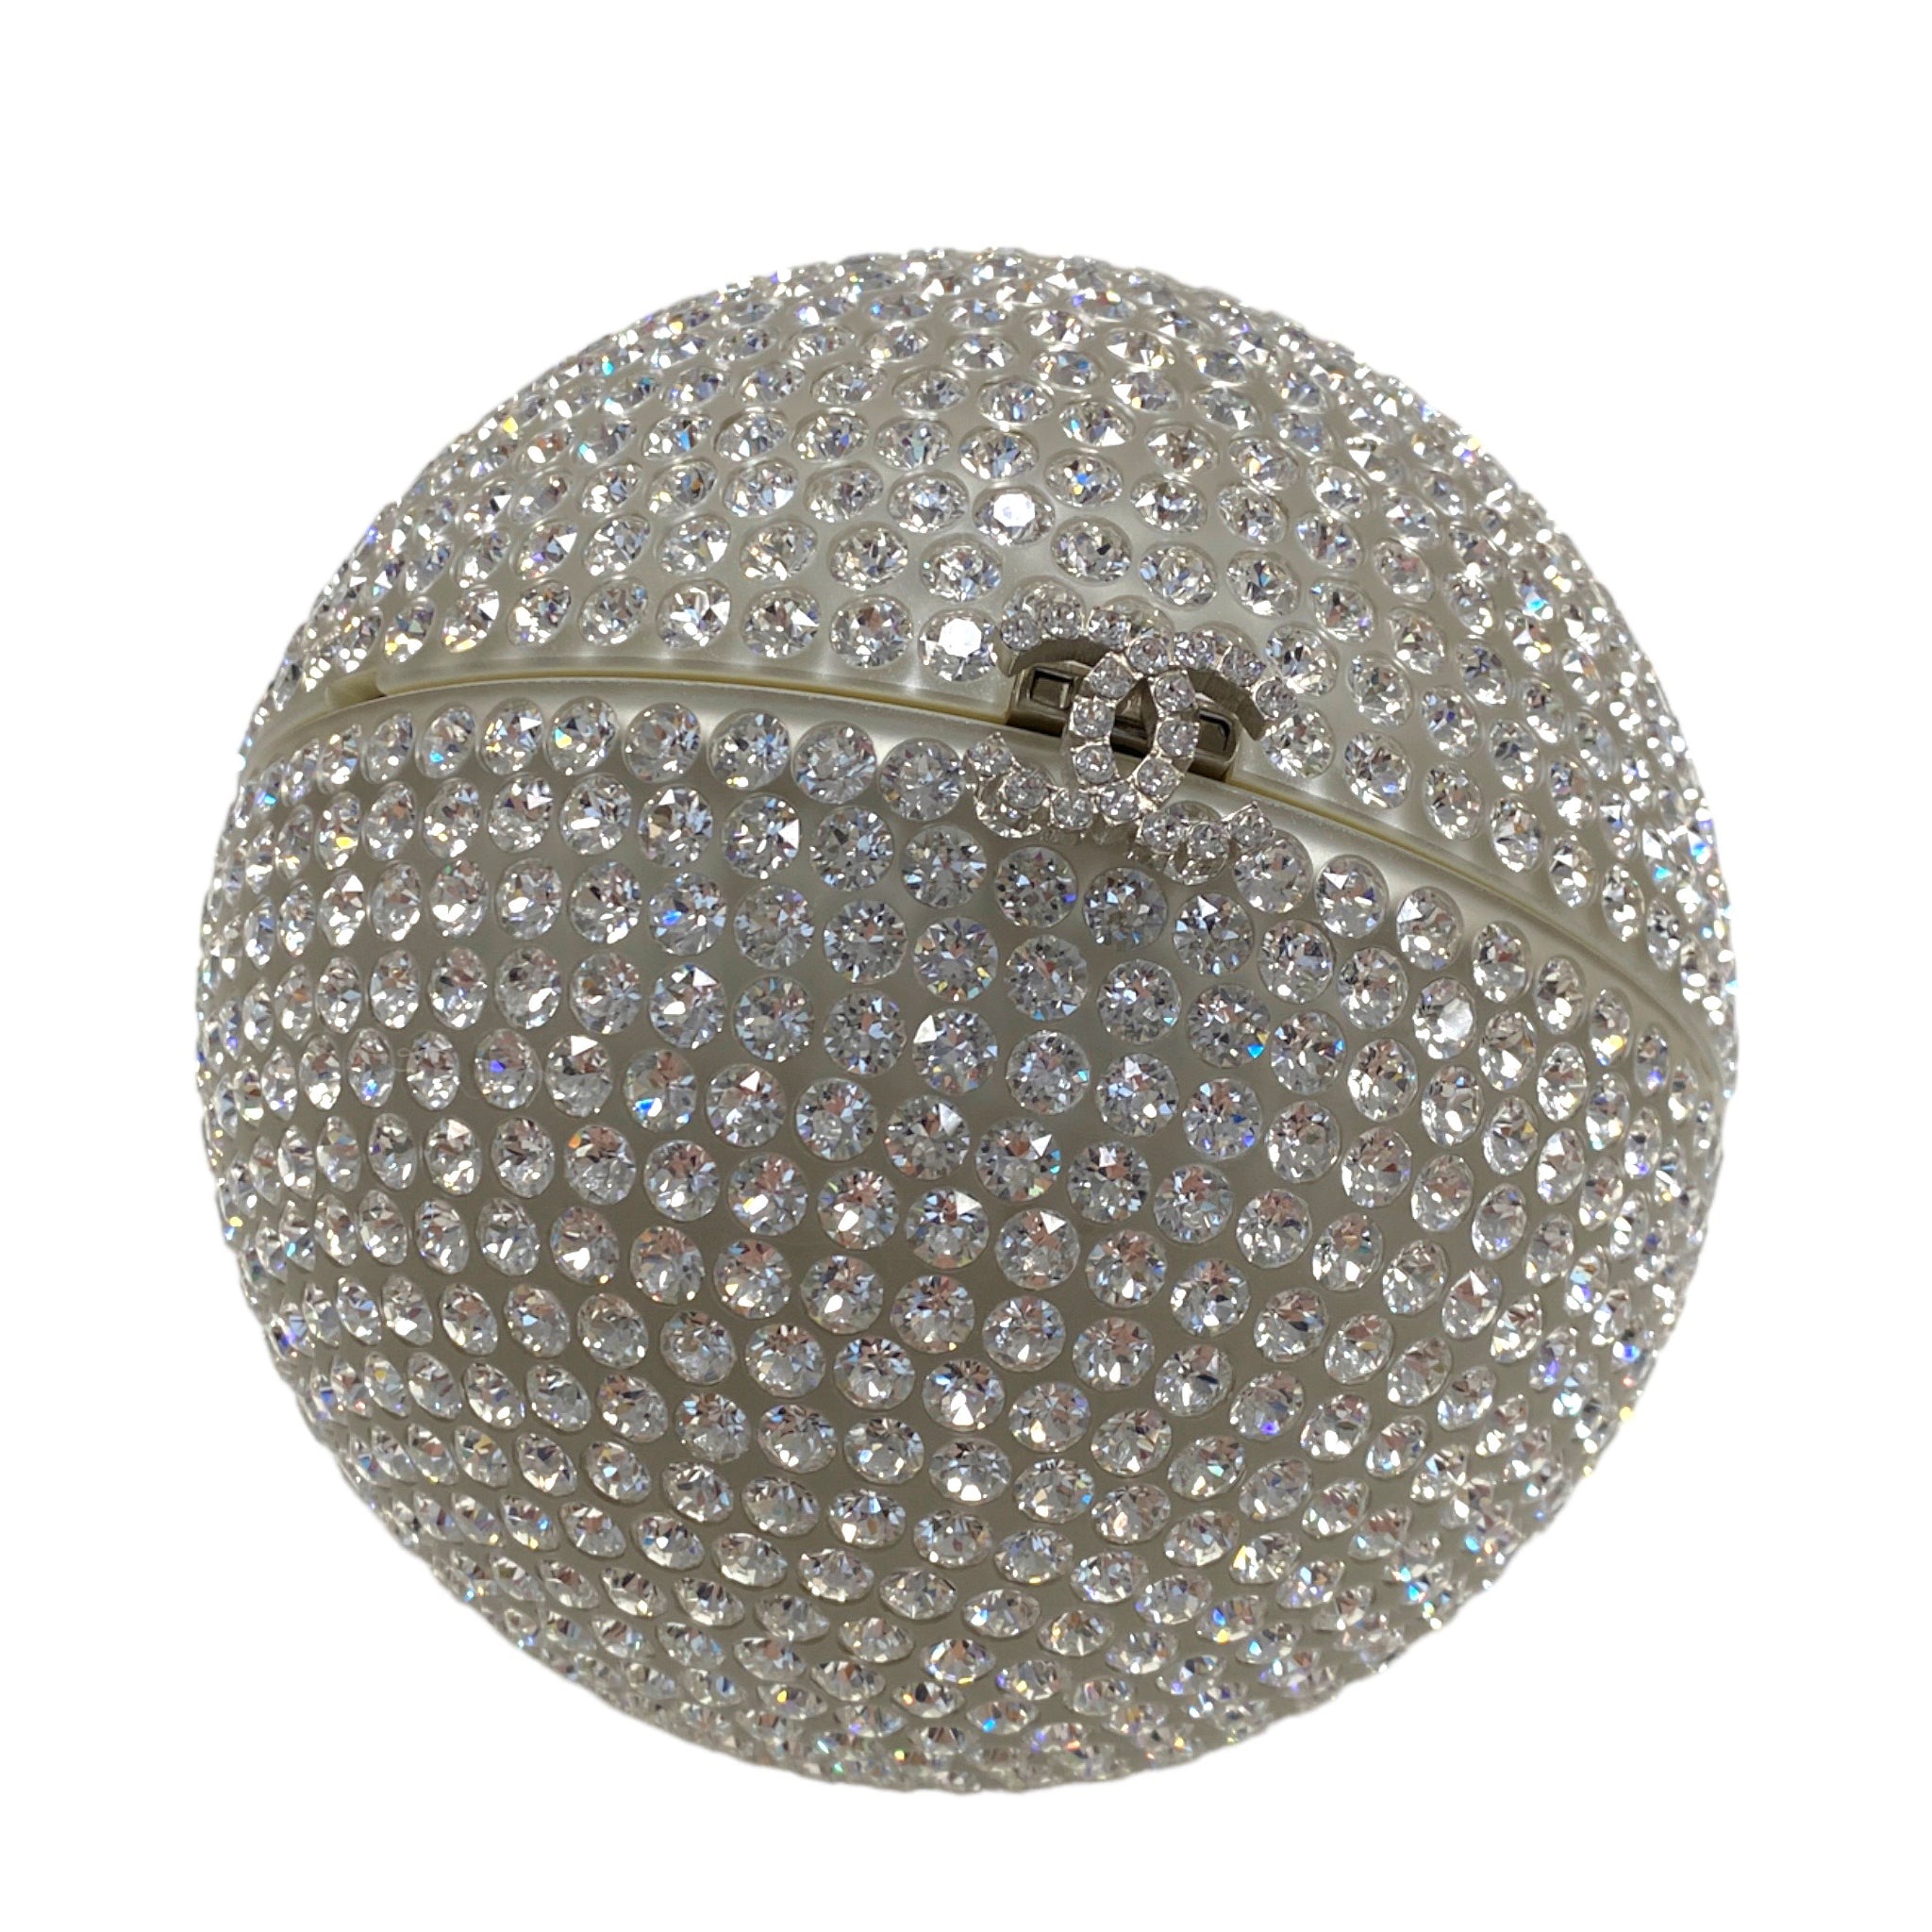 Chanel Minaudière Limited Edition Crystal Ball Evening Clutch